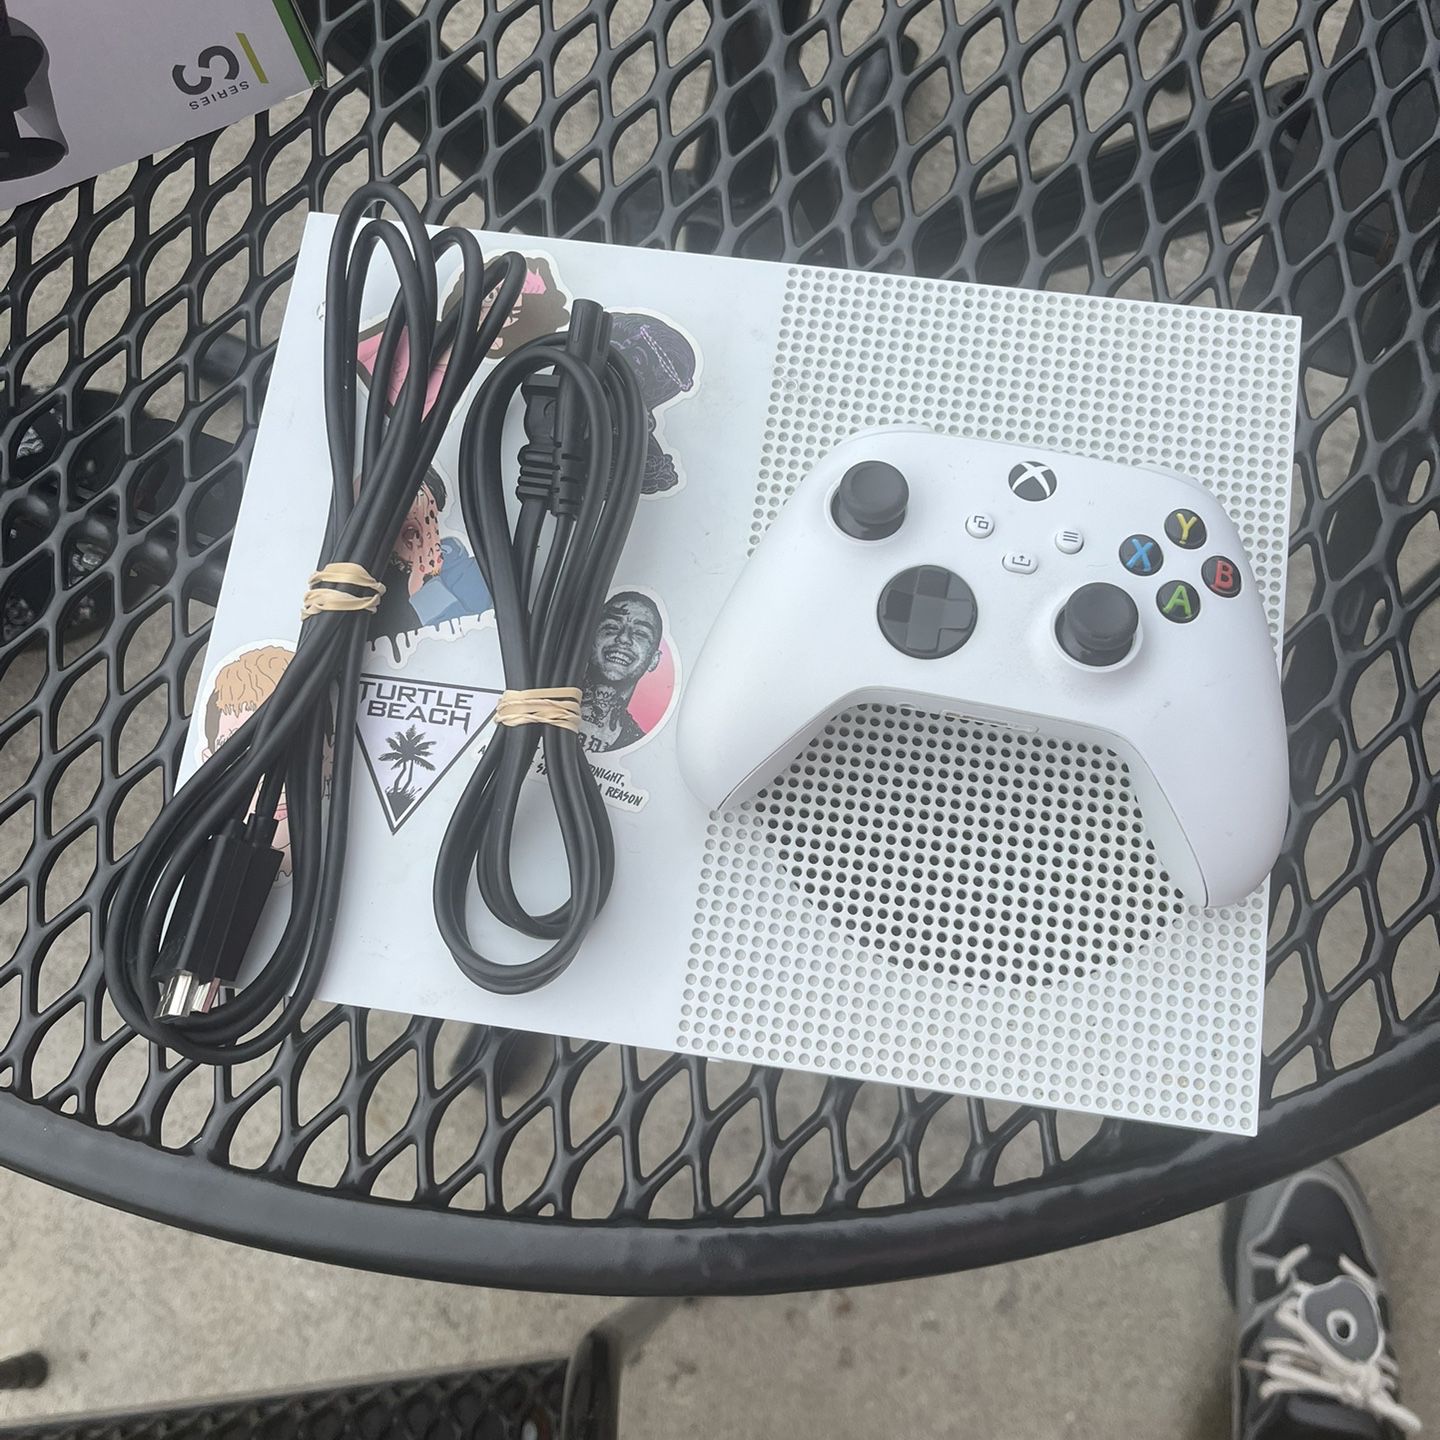 Xbox One S For Sell For 130 